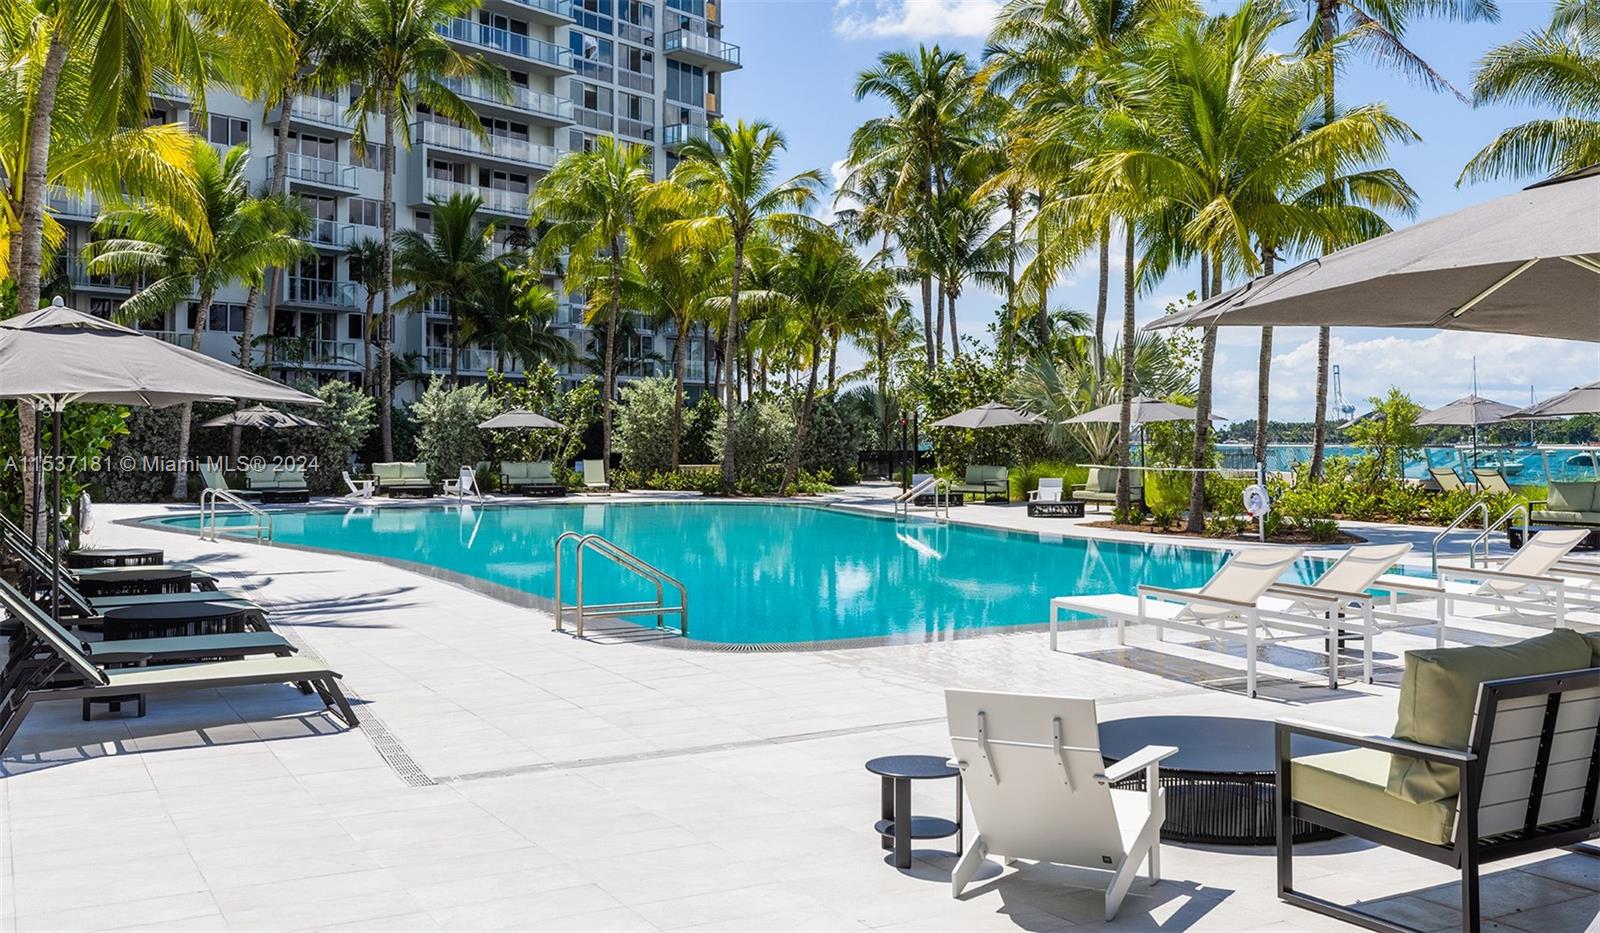 AVAILABLE 03/21 (UNIT CAN'T BE SHOWN TILL AVAILABLE DATE). Photos may be from the exact unit on the same line but in another floor. Welcome to Miami Beach's most exciting rental community Flamingo Point. This spacious unit features modern kitchen & baths. Amenities include fitness center, two resort style bay front pools and private cabanas, BBQ area and much more. Move in costs are 1st month + $ 1,500 deposit. Parking cost 1st vchl. $117 p/m. Pet Fee: $500+$50/month. *FAST APPROVAL! (NOTE: Rental rates are subject to change depending on move-in date and lease term. Advertised rate is best rate and maybe on leases longer than 12 months. Proof of income greater than 3x one month's rent is required and minimum credit score of 620 or higher in order to be approved).